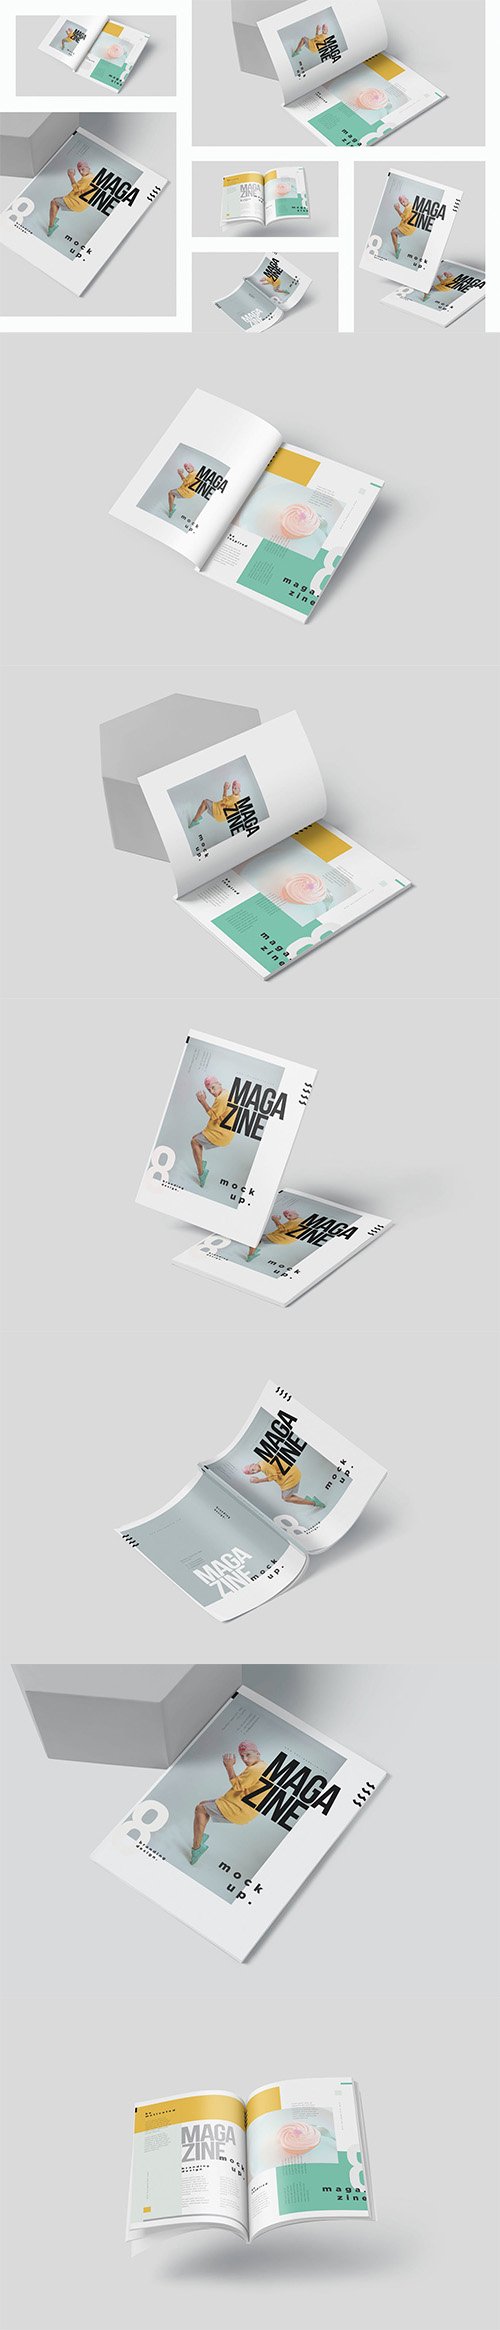 A5 Size Softcover Magazine Mockups Template